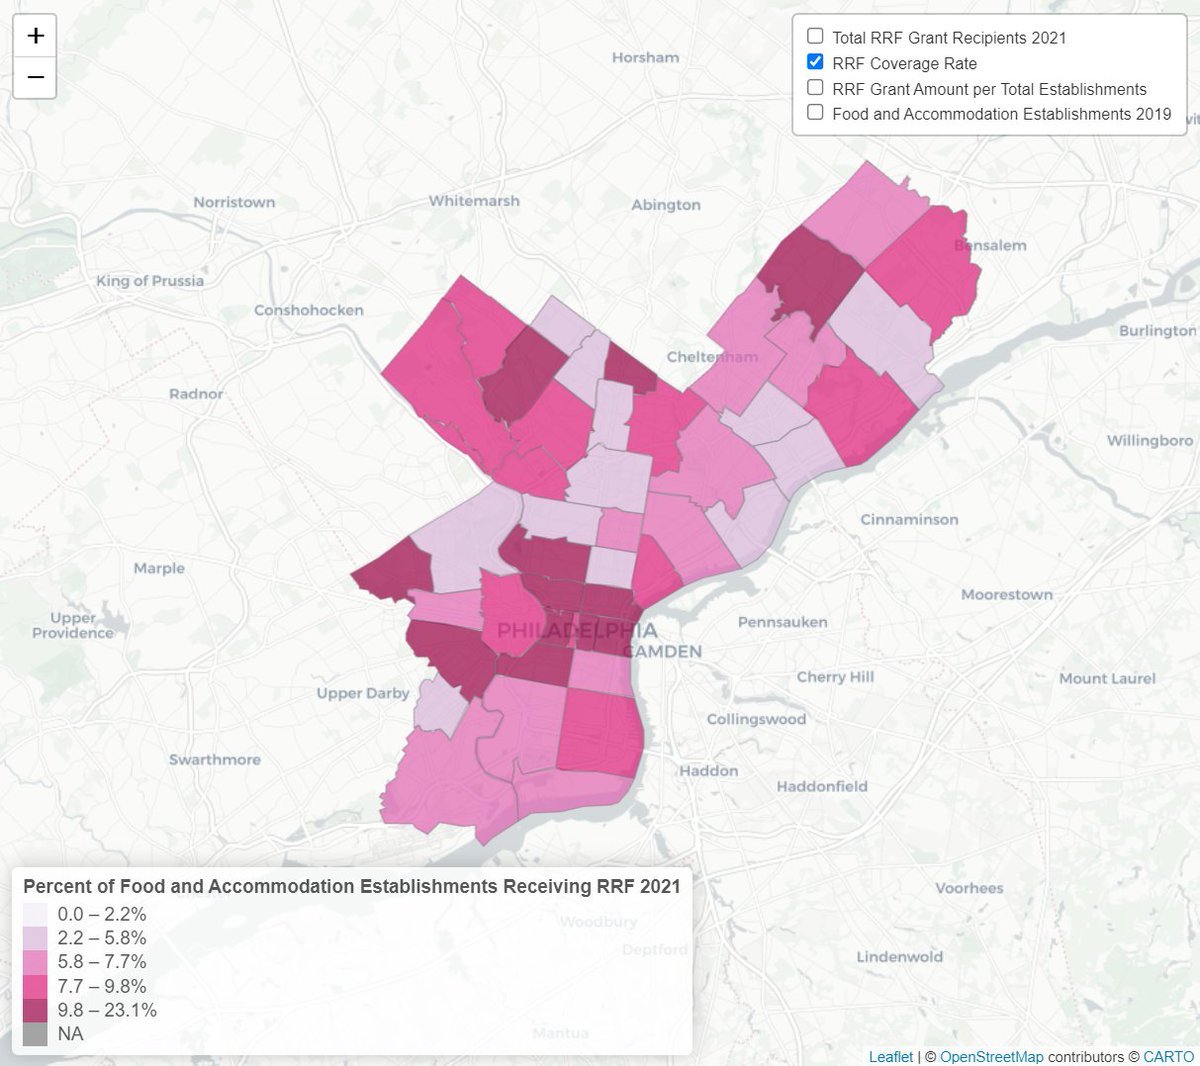 #PhillyFact: Normalizing the #RestaurantRevitalizationFund’s coverage rate (by the proportion of total estimated food and accommodation establishments), suggests a large disparity among Philly's zip codes.

Read more here: economyleague.org/providing-insi…
#PolicyHub #Data4Philly #SmallBiz